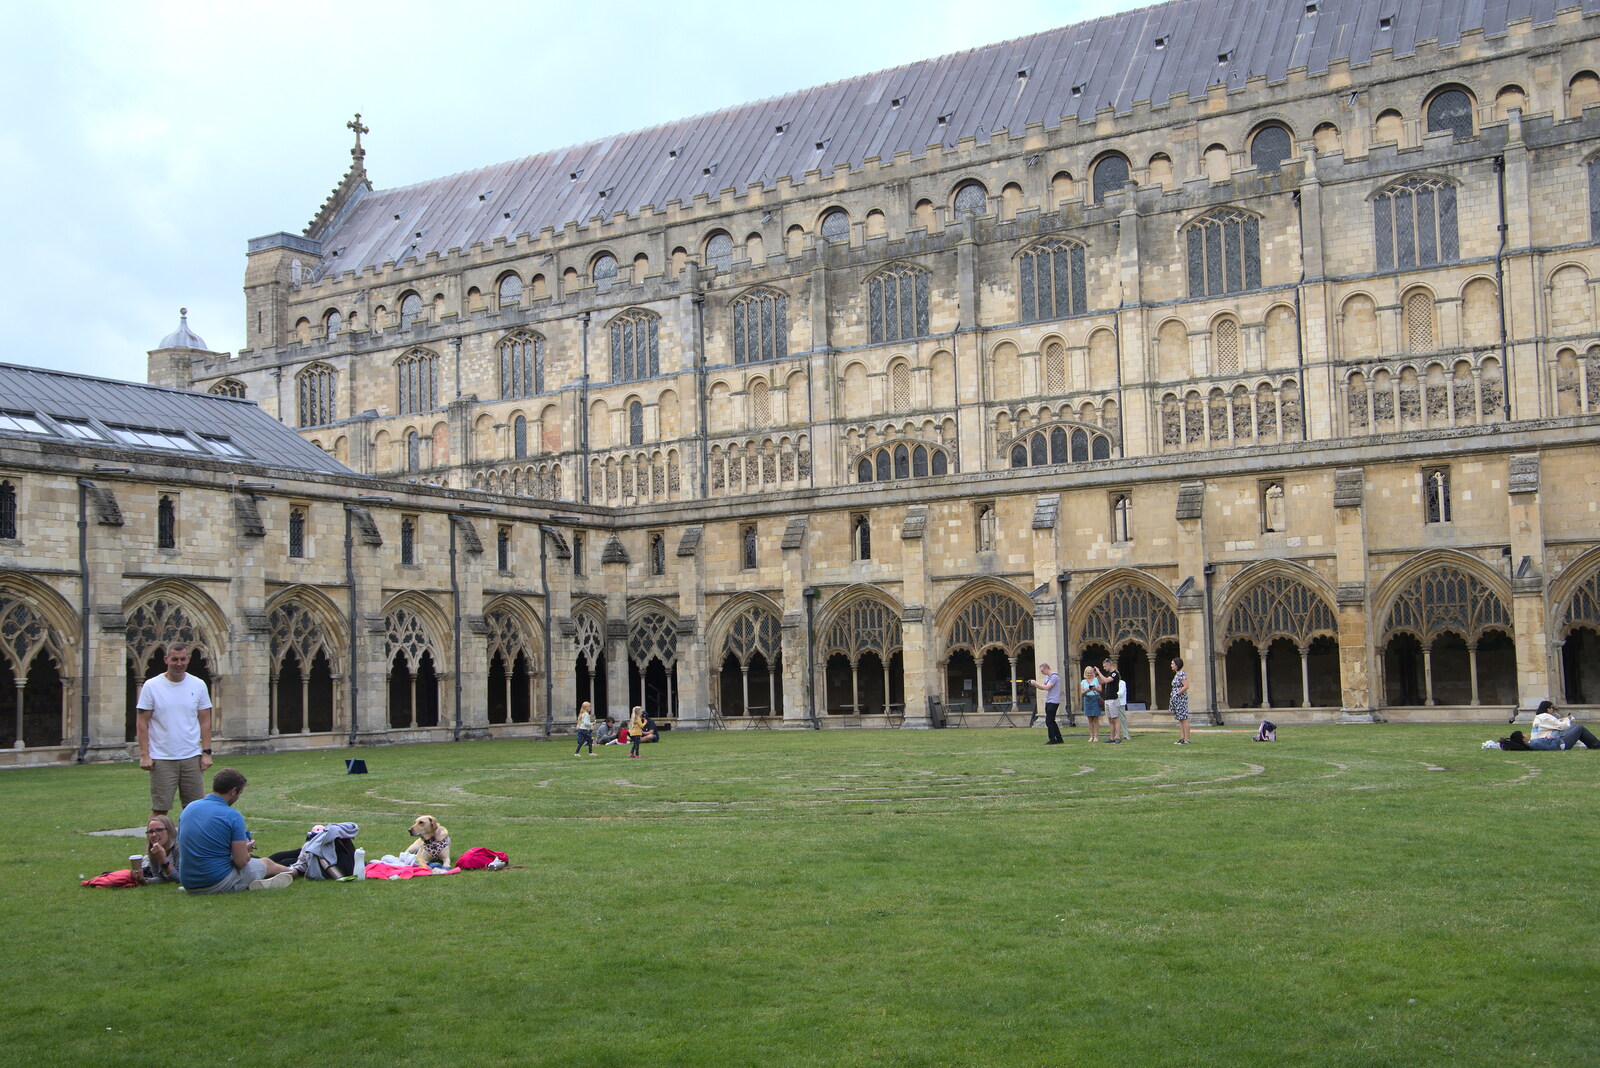 Picnic in the cloisters from Dippy and the City Dinosaur Trail, Norwich, Norfolk - 19th August 2021